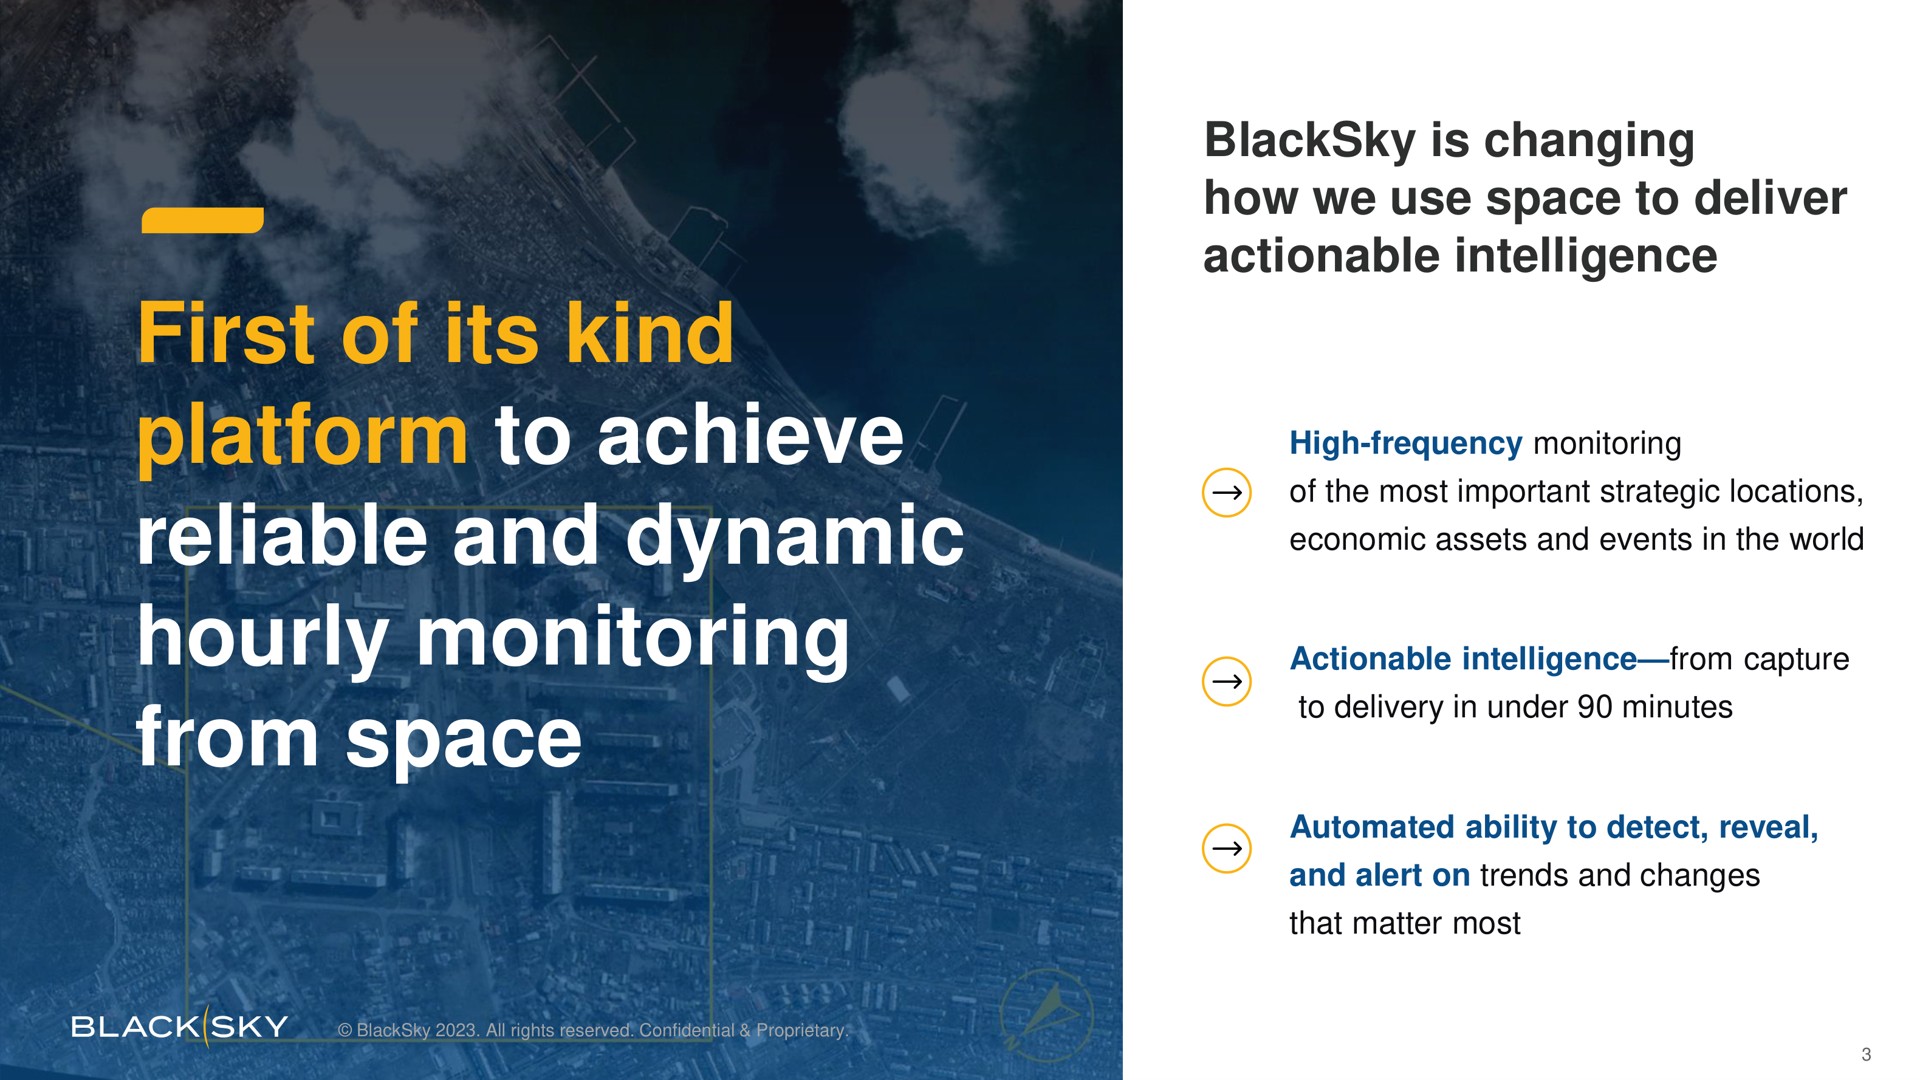 first of its kind platform to achieve reliable and dynamic hourly monitoring from space is changing how we use space to deliver actionable intelligence sedan economic events in he word capture | BlackSky